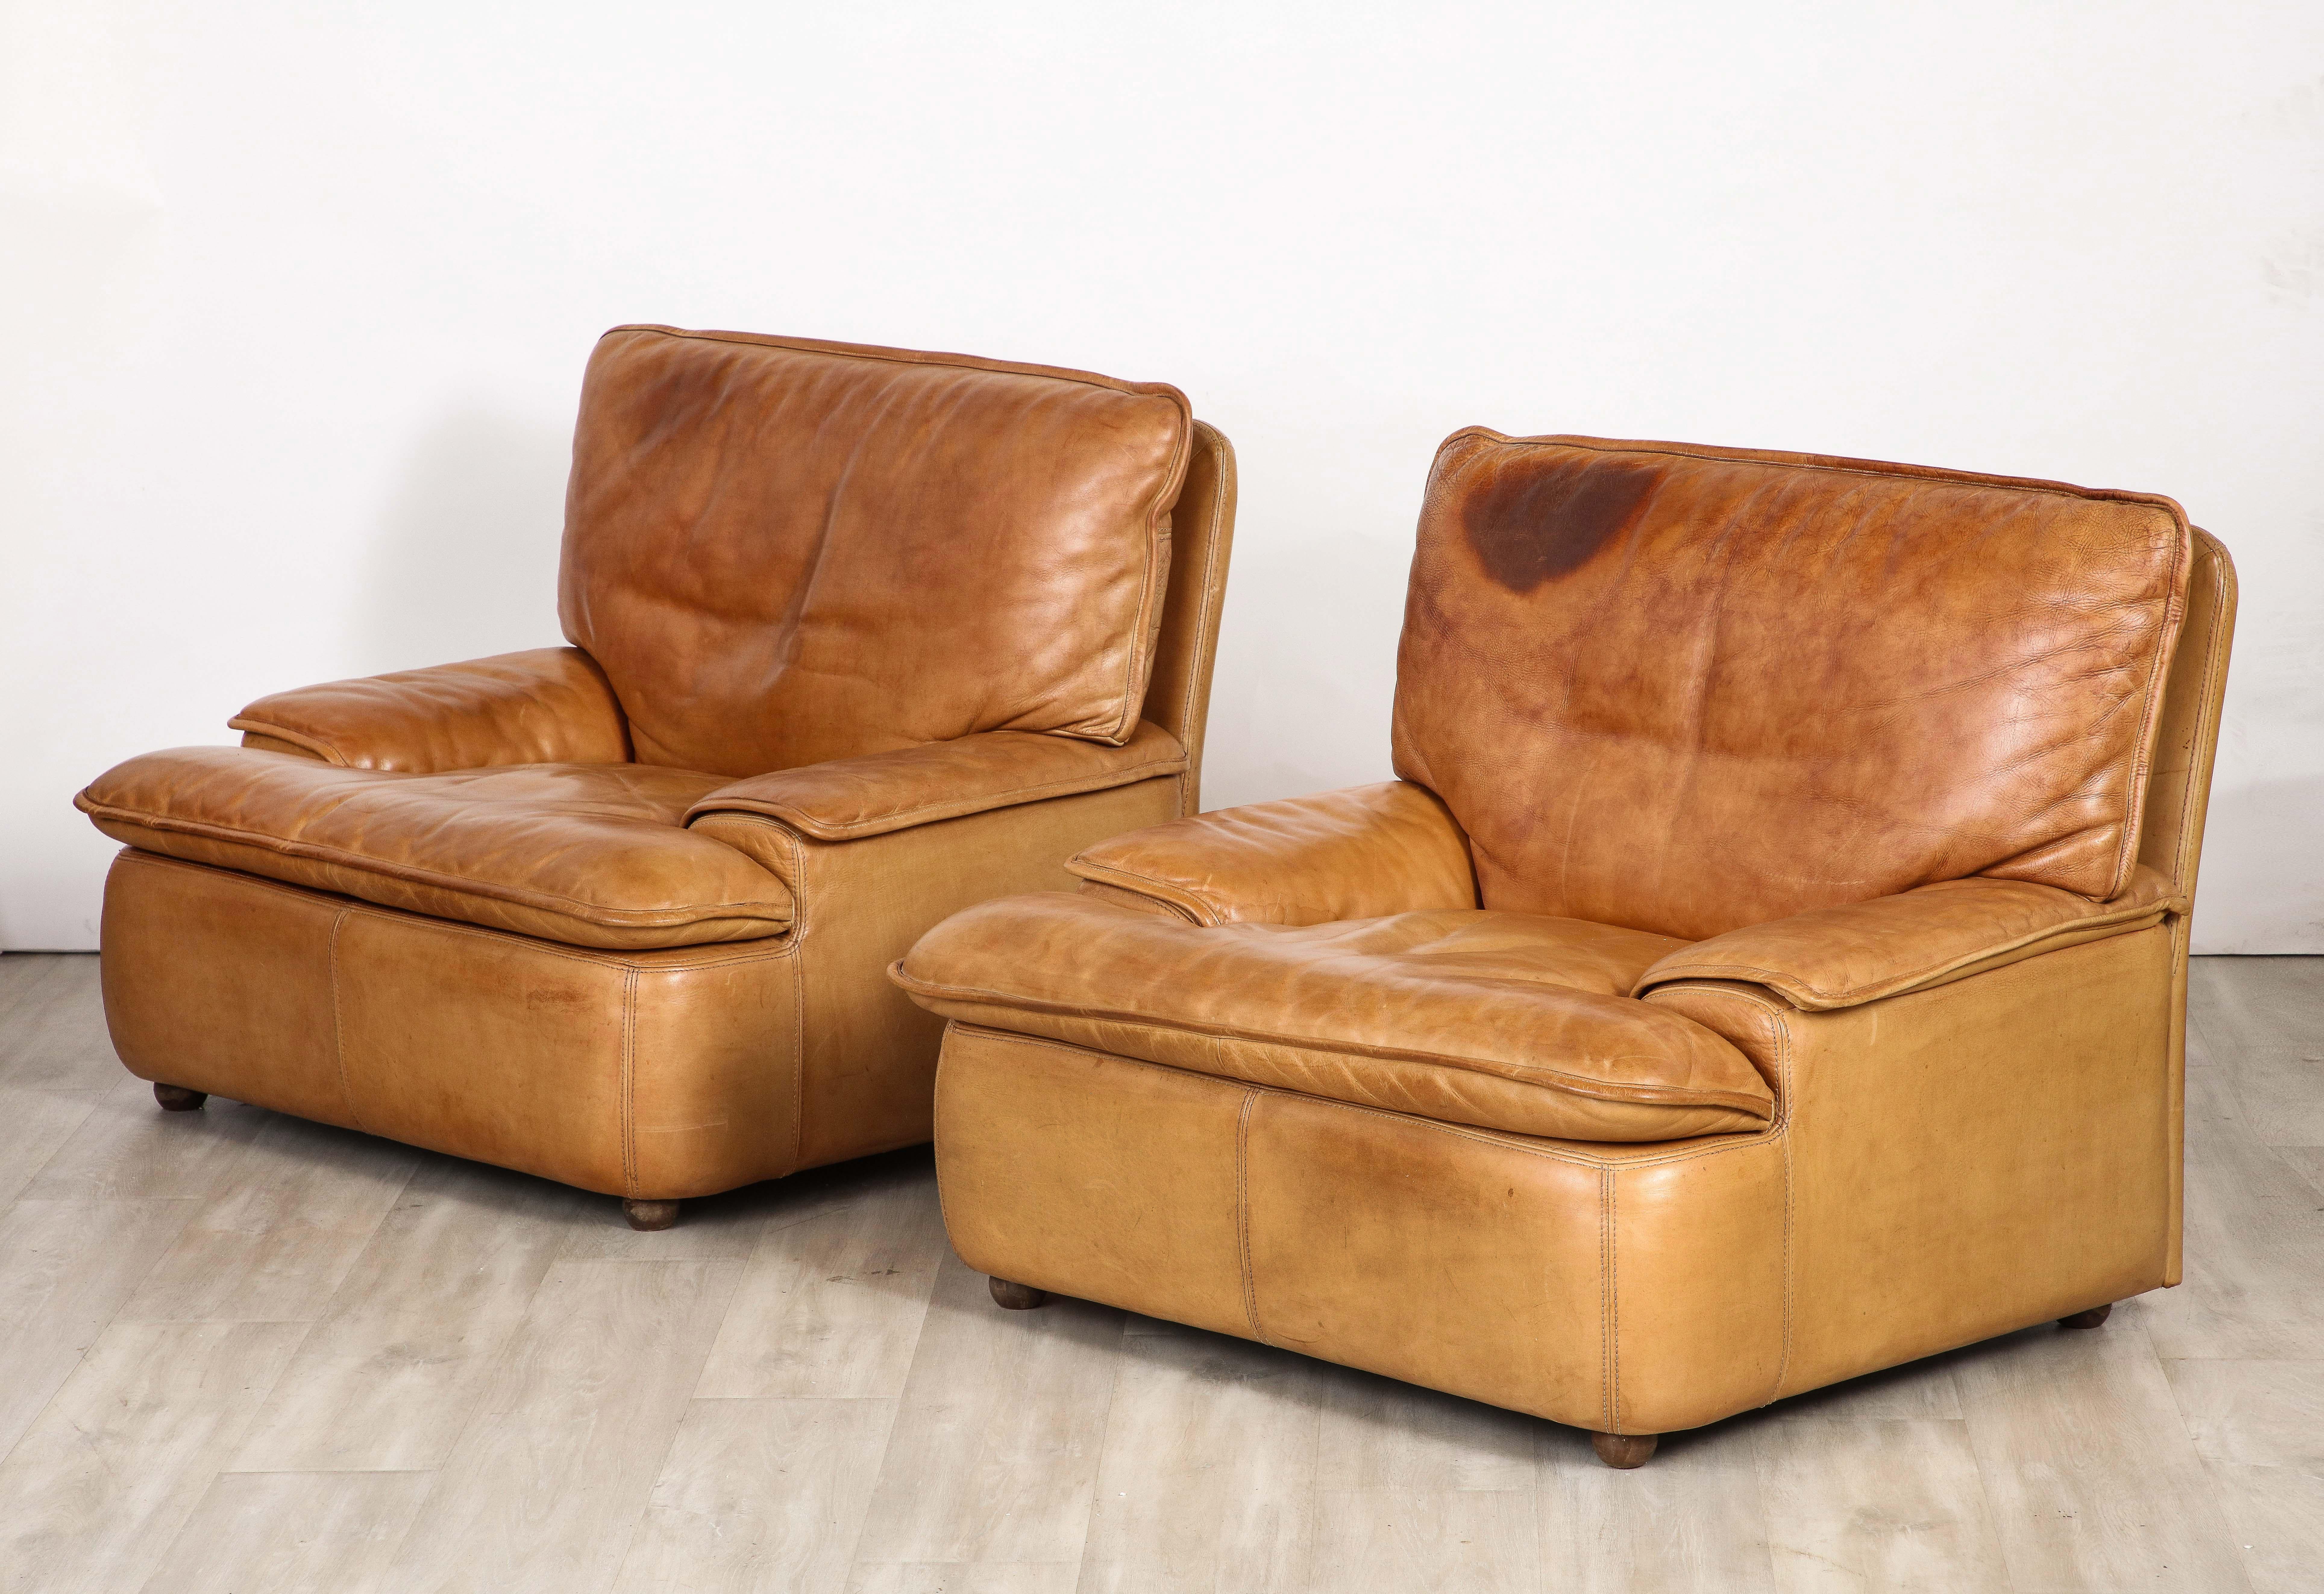 A pair of Belgian leather lounge chairs, with fantastic proportions and grand in scale.  All original caramel colored sumptuous leather with a rich patina; the seats, arm rests and back are kept into place with Velcro to secure a minimalist and